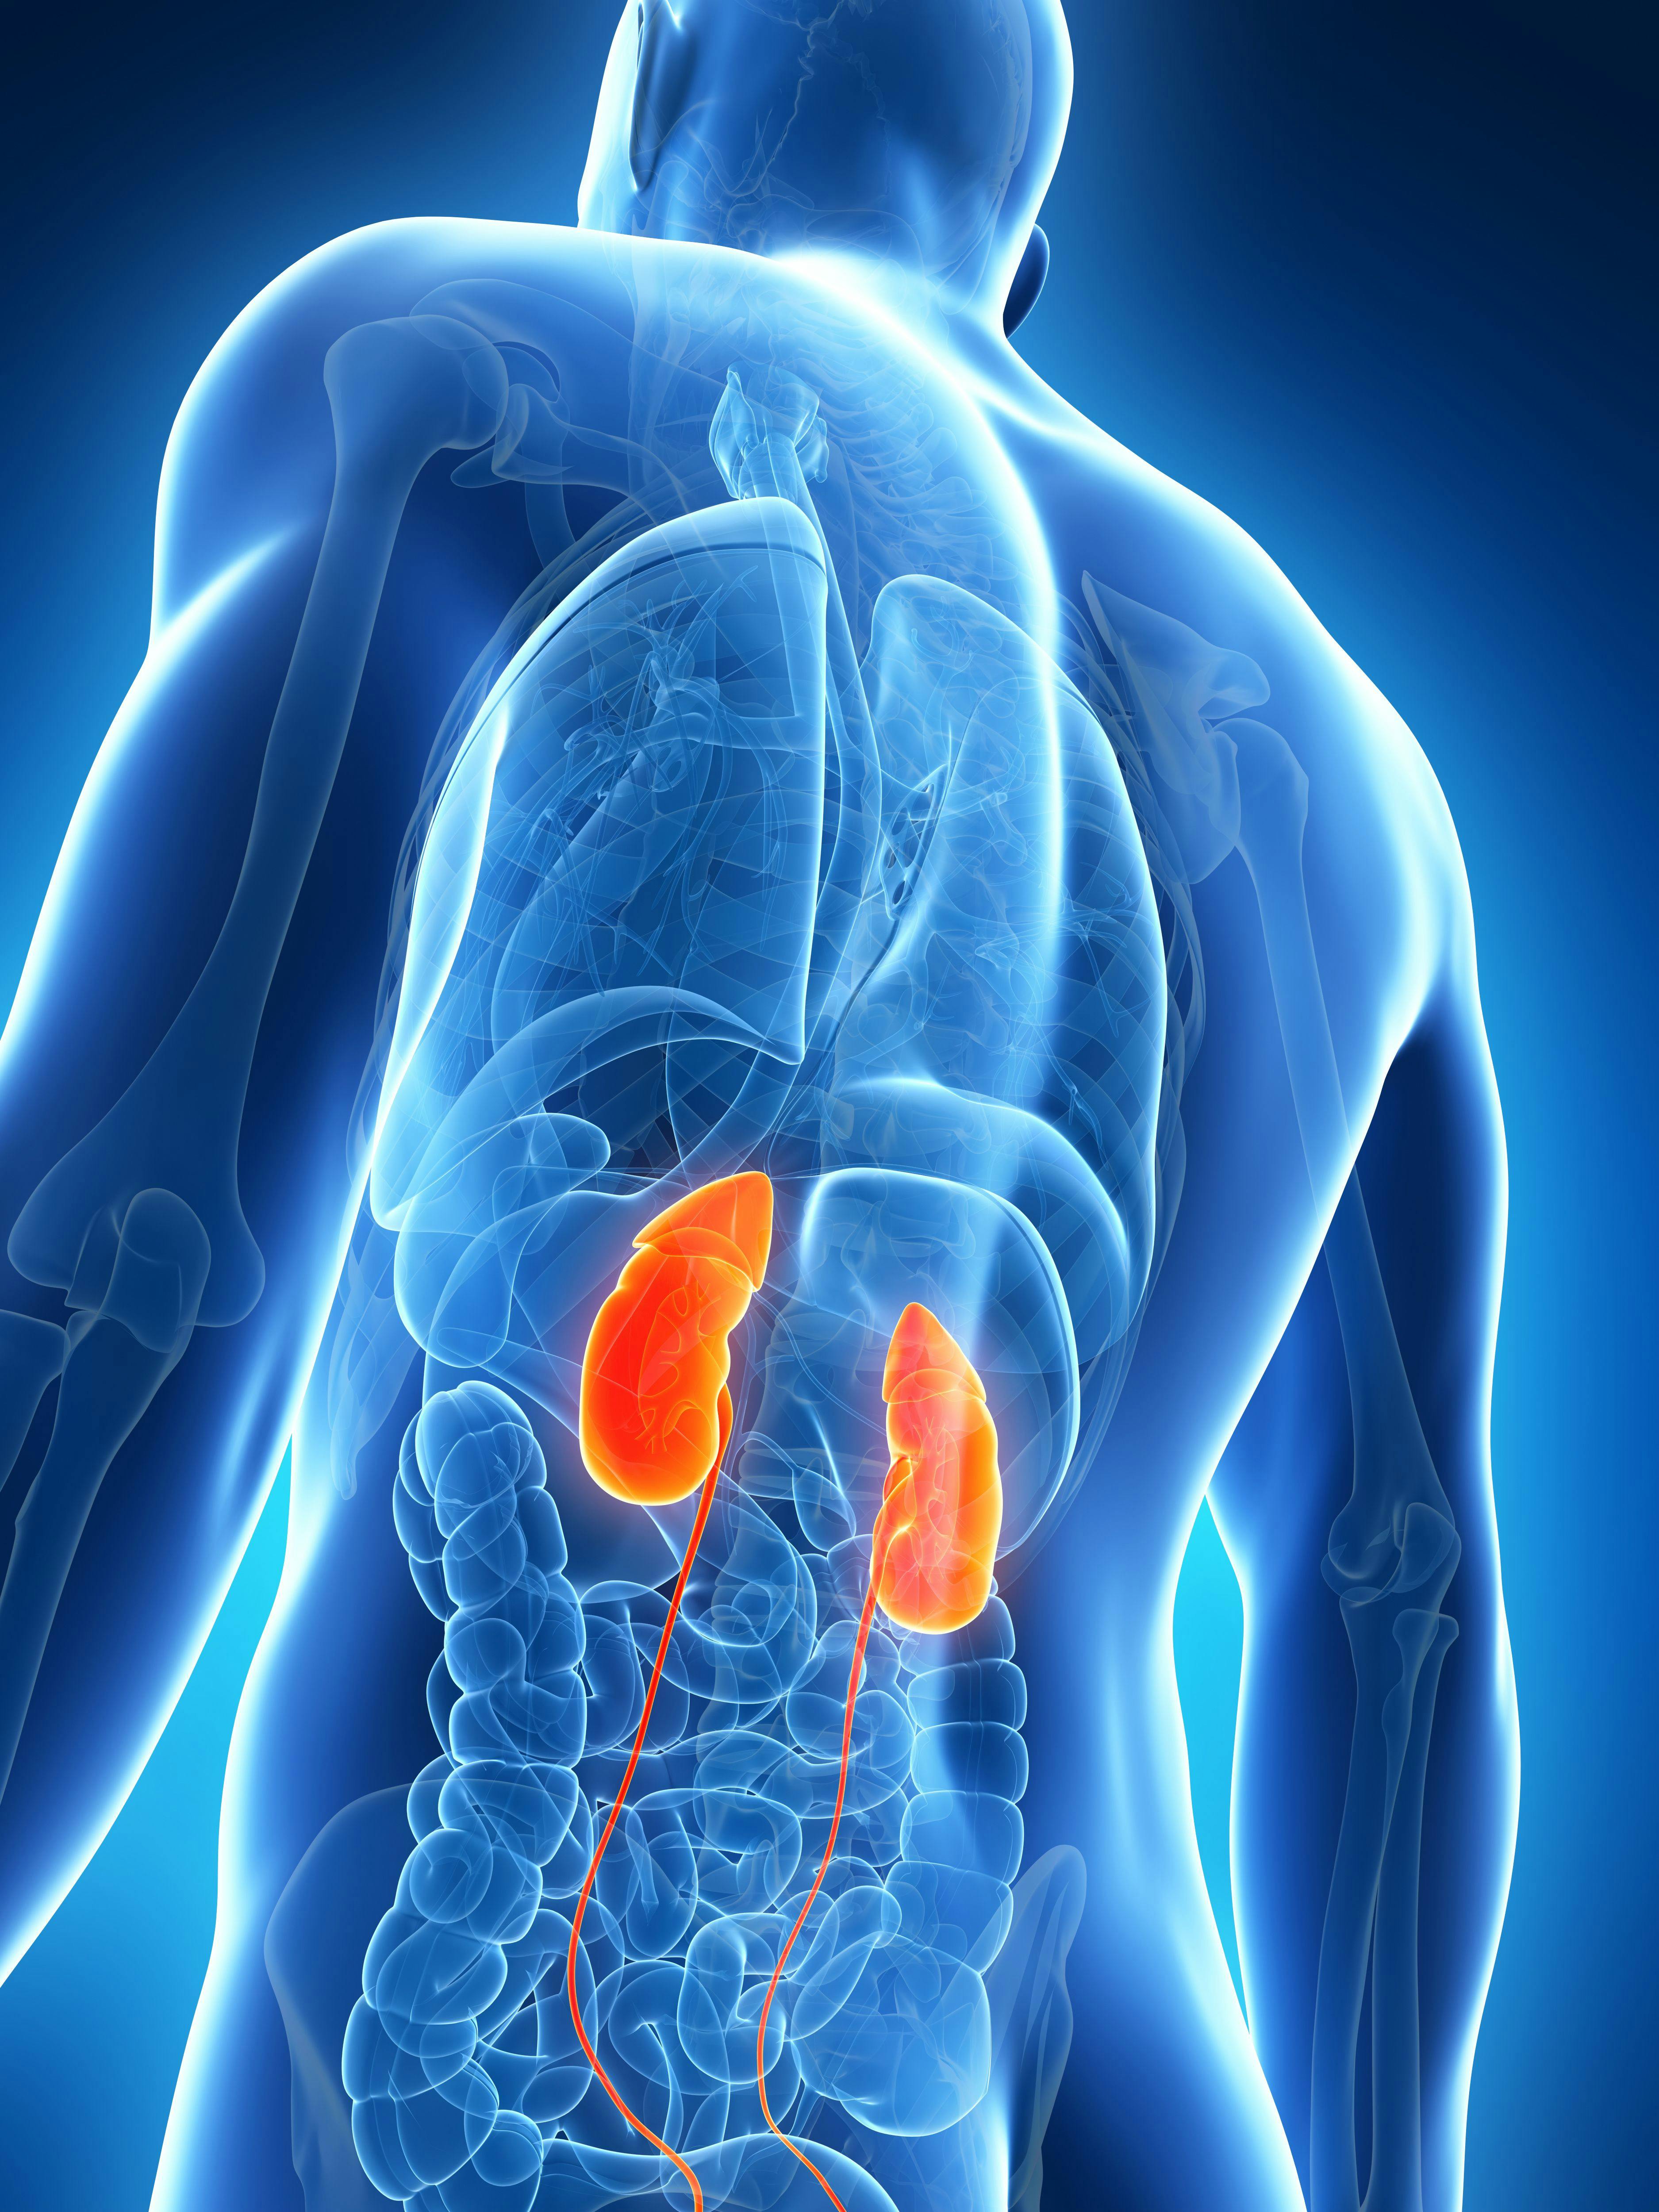 Study Supports Renal Biomarker Candidate for Proliferative Lupus Nephritis Chronicity